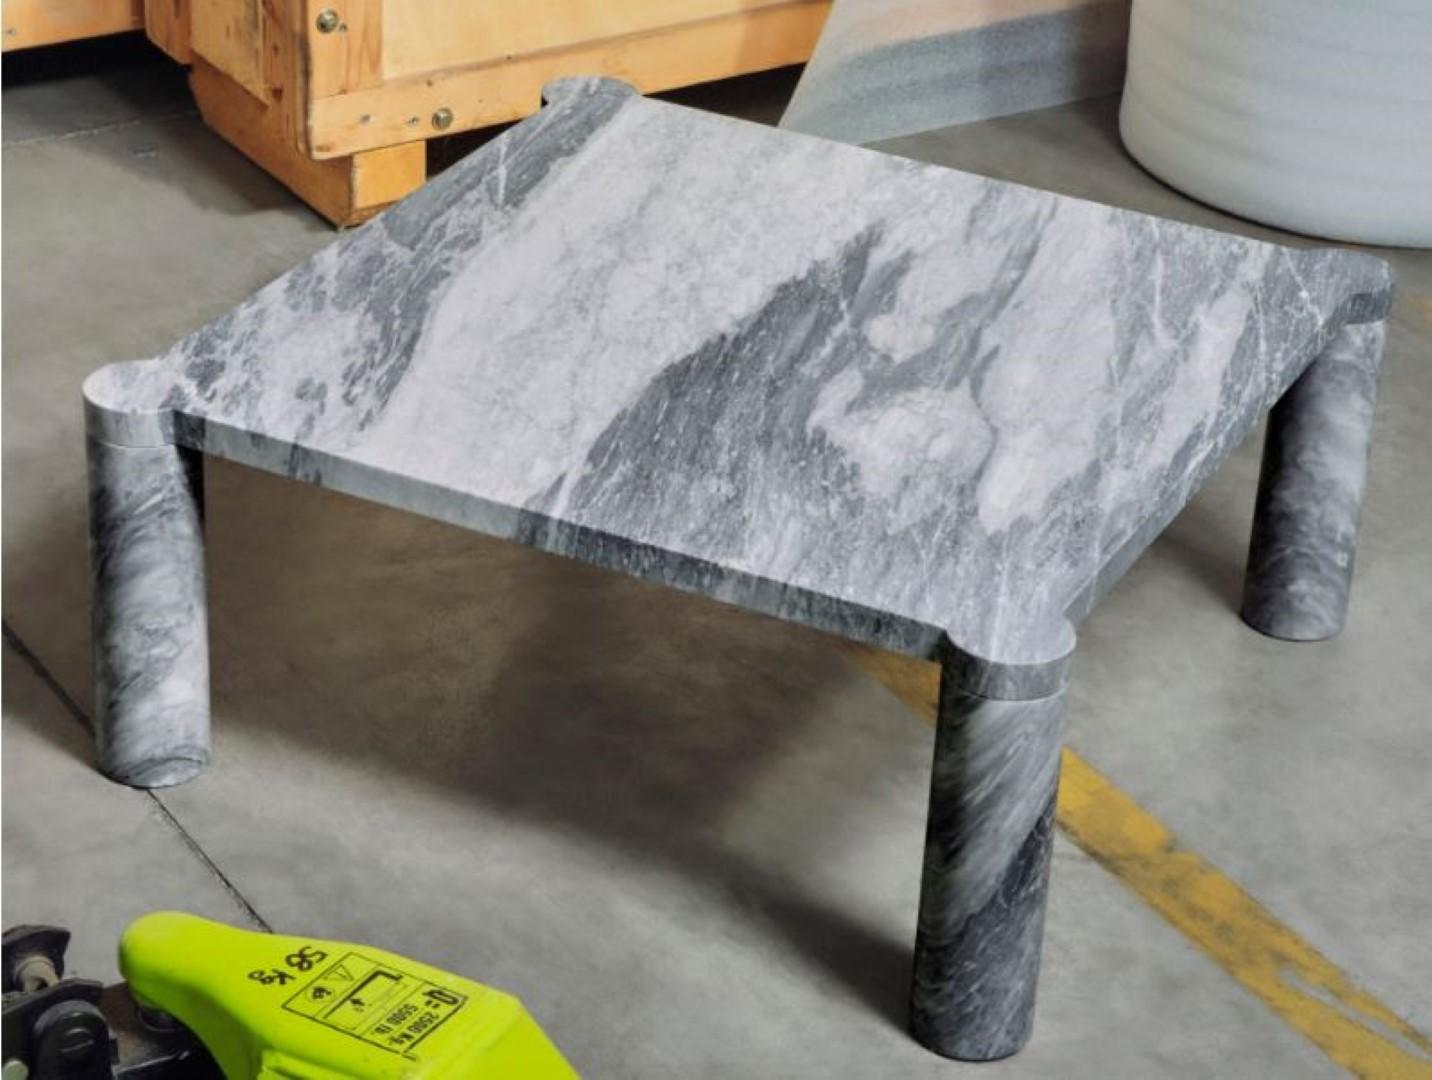 Alessio 80 Coffee Table by Agglomerati
Dimensions: D 80 x W 80 x H 33 cm.
Materials: Bardiglio Nuvolato Marble.
Available in other stones. Please contact us.

Alessio is a square coffee table enclosed by four cylindrical legs which sit seamlessly